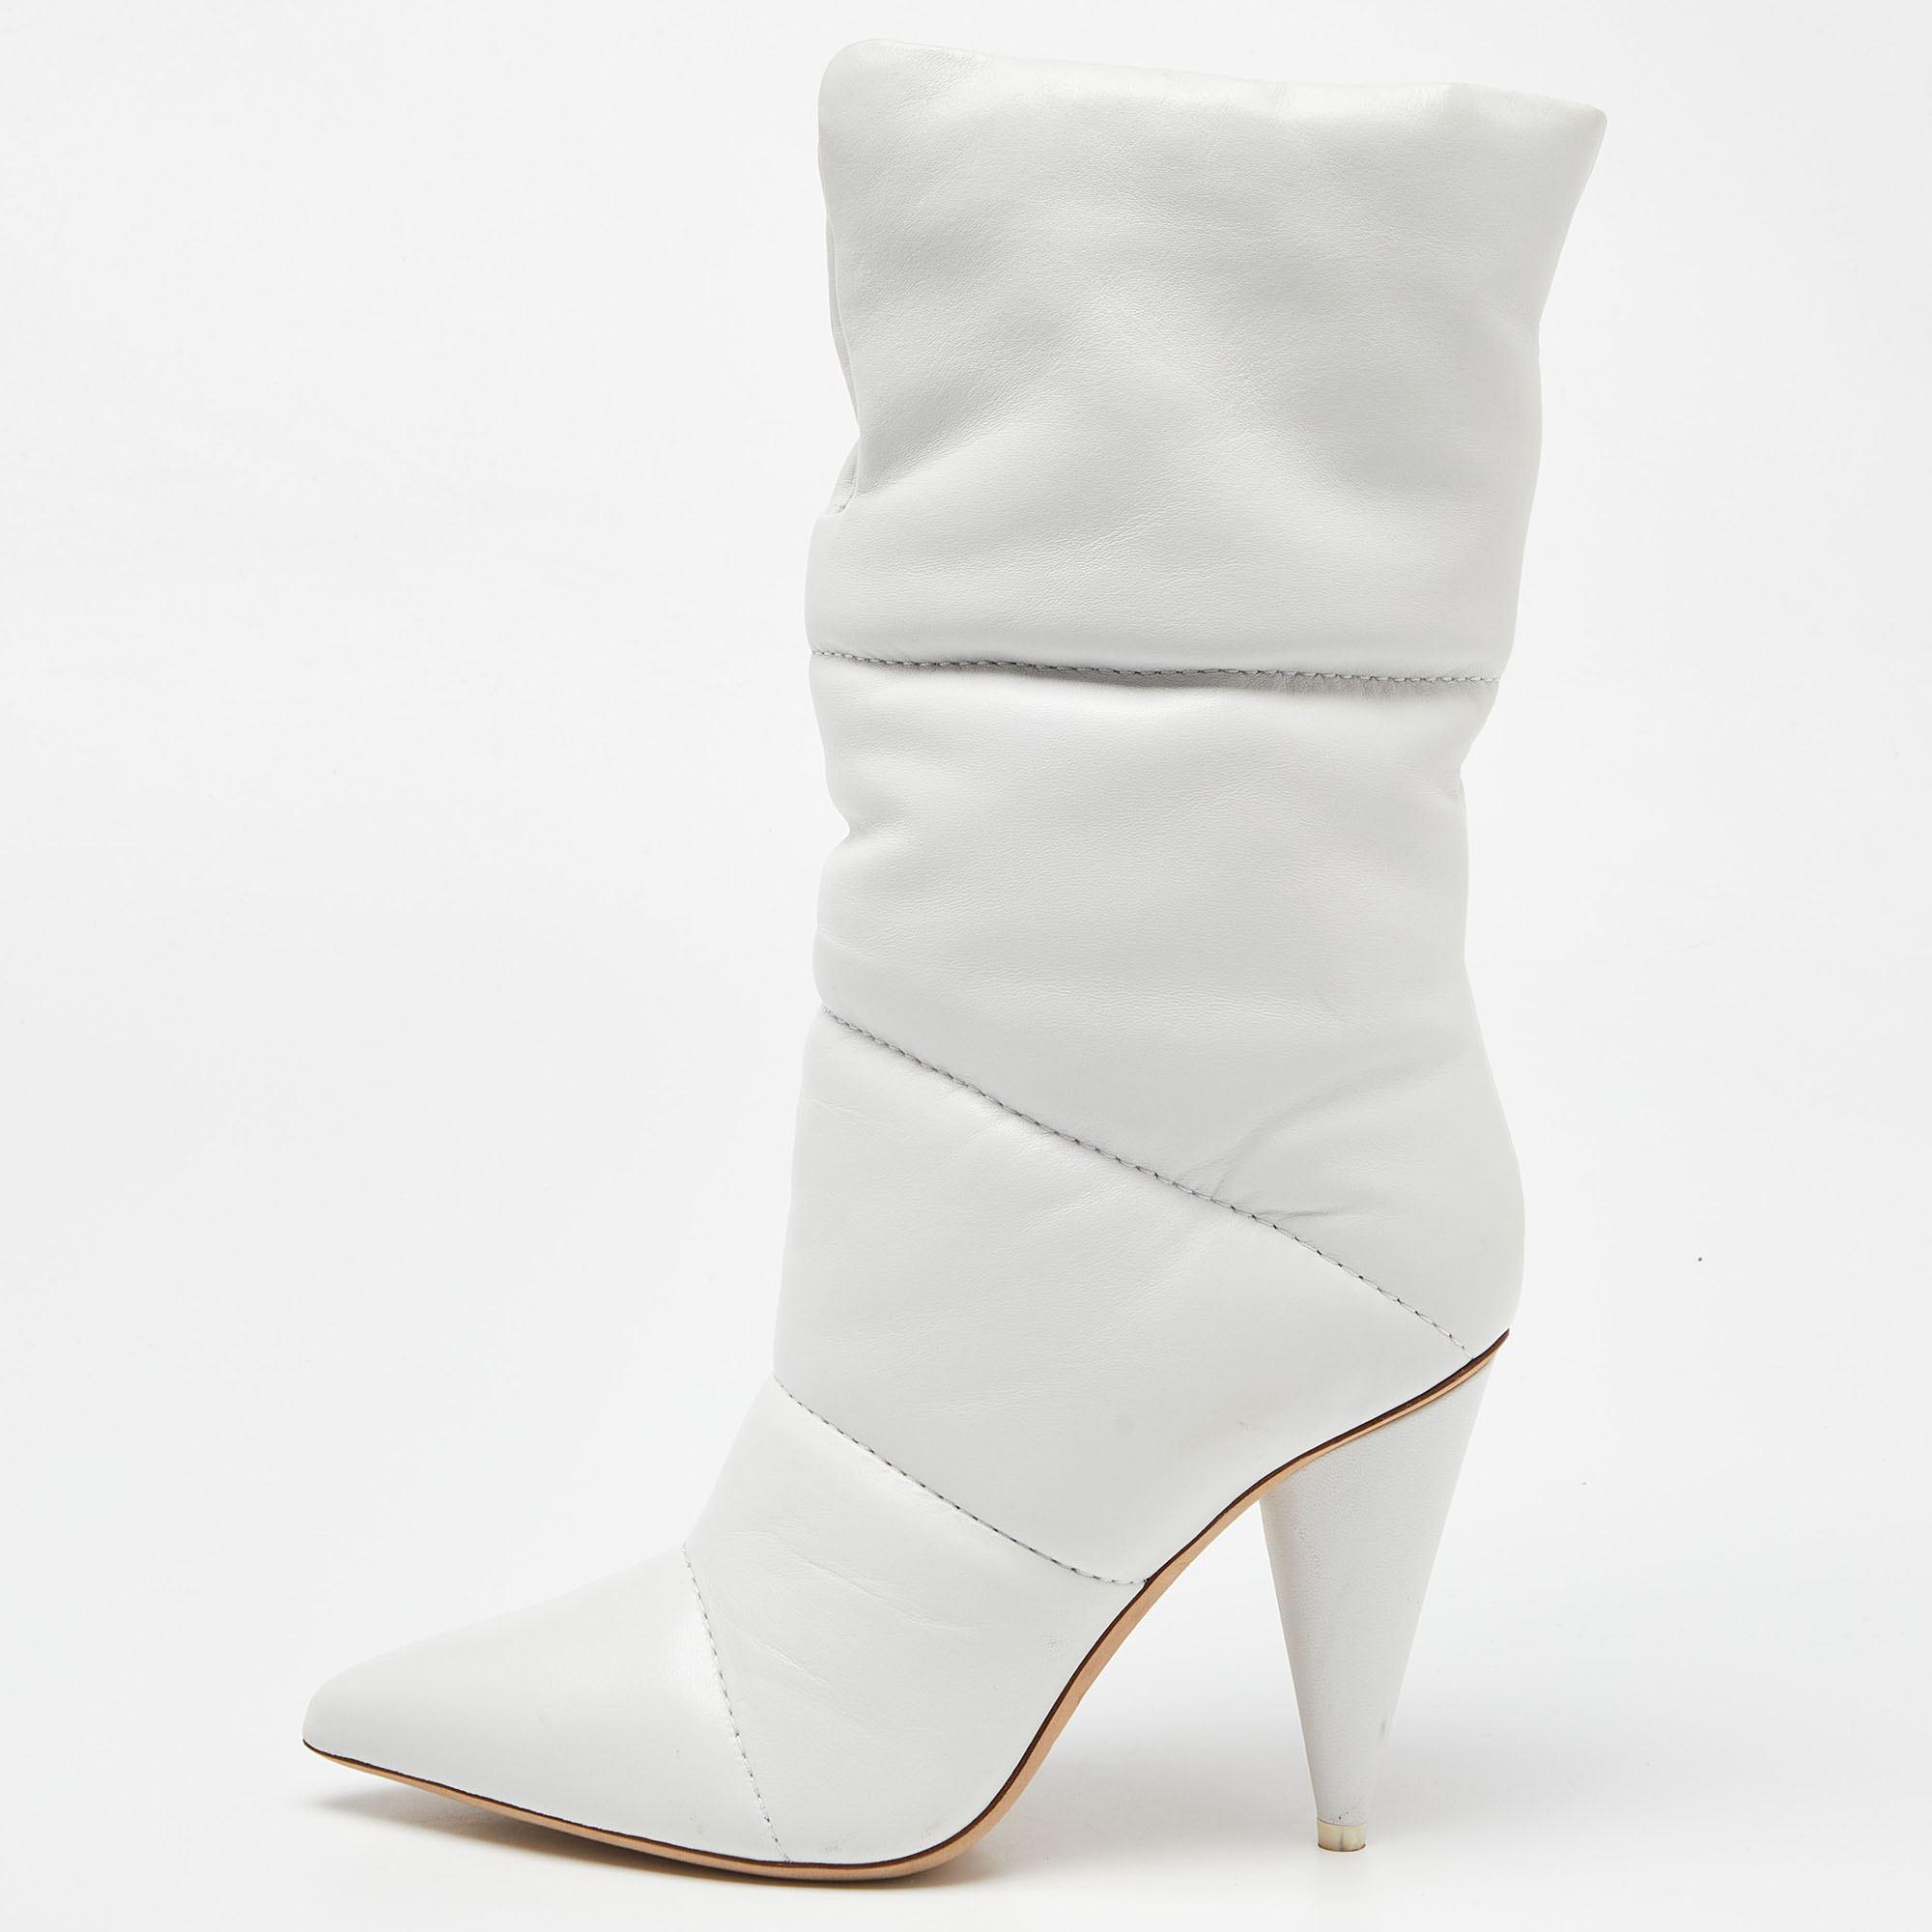 Off-white x  jimmy choo white leather mid calf boots size 39.5